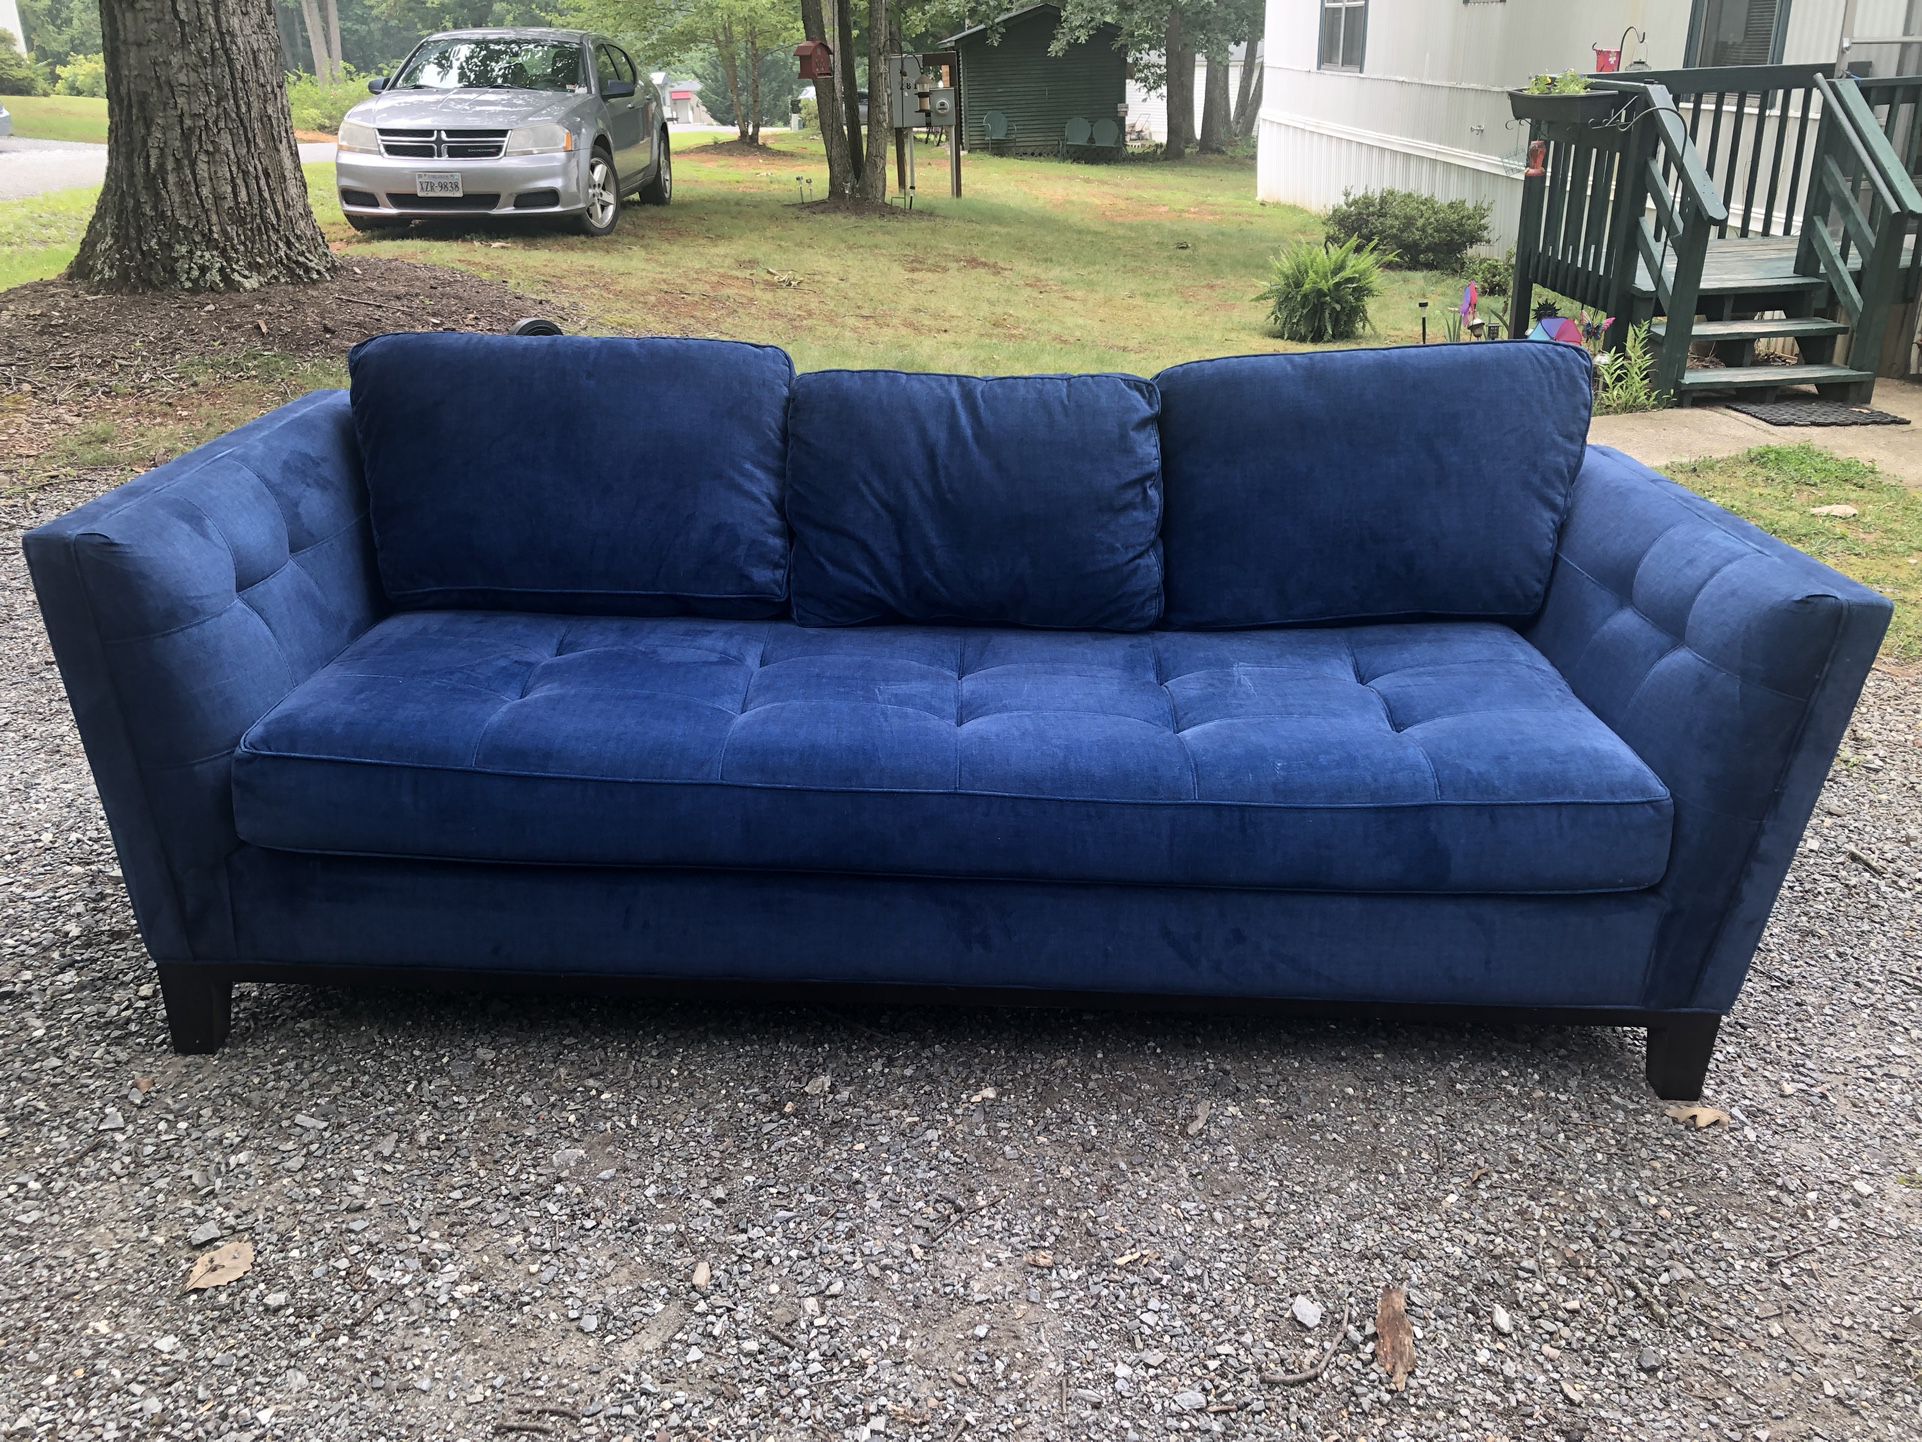 Beautiful Blue Cindy Crawford Sofa From Rooms To Go